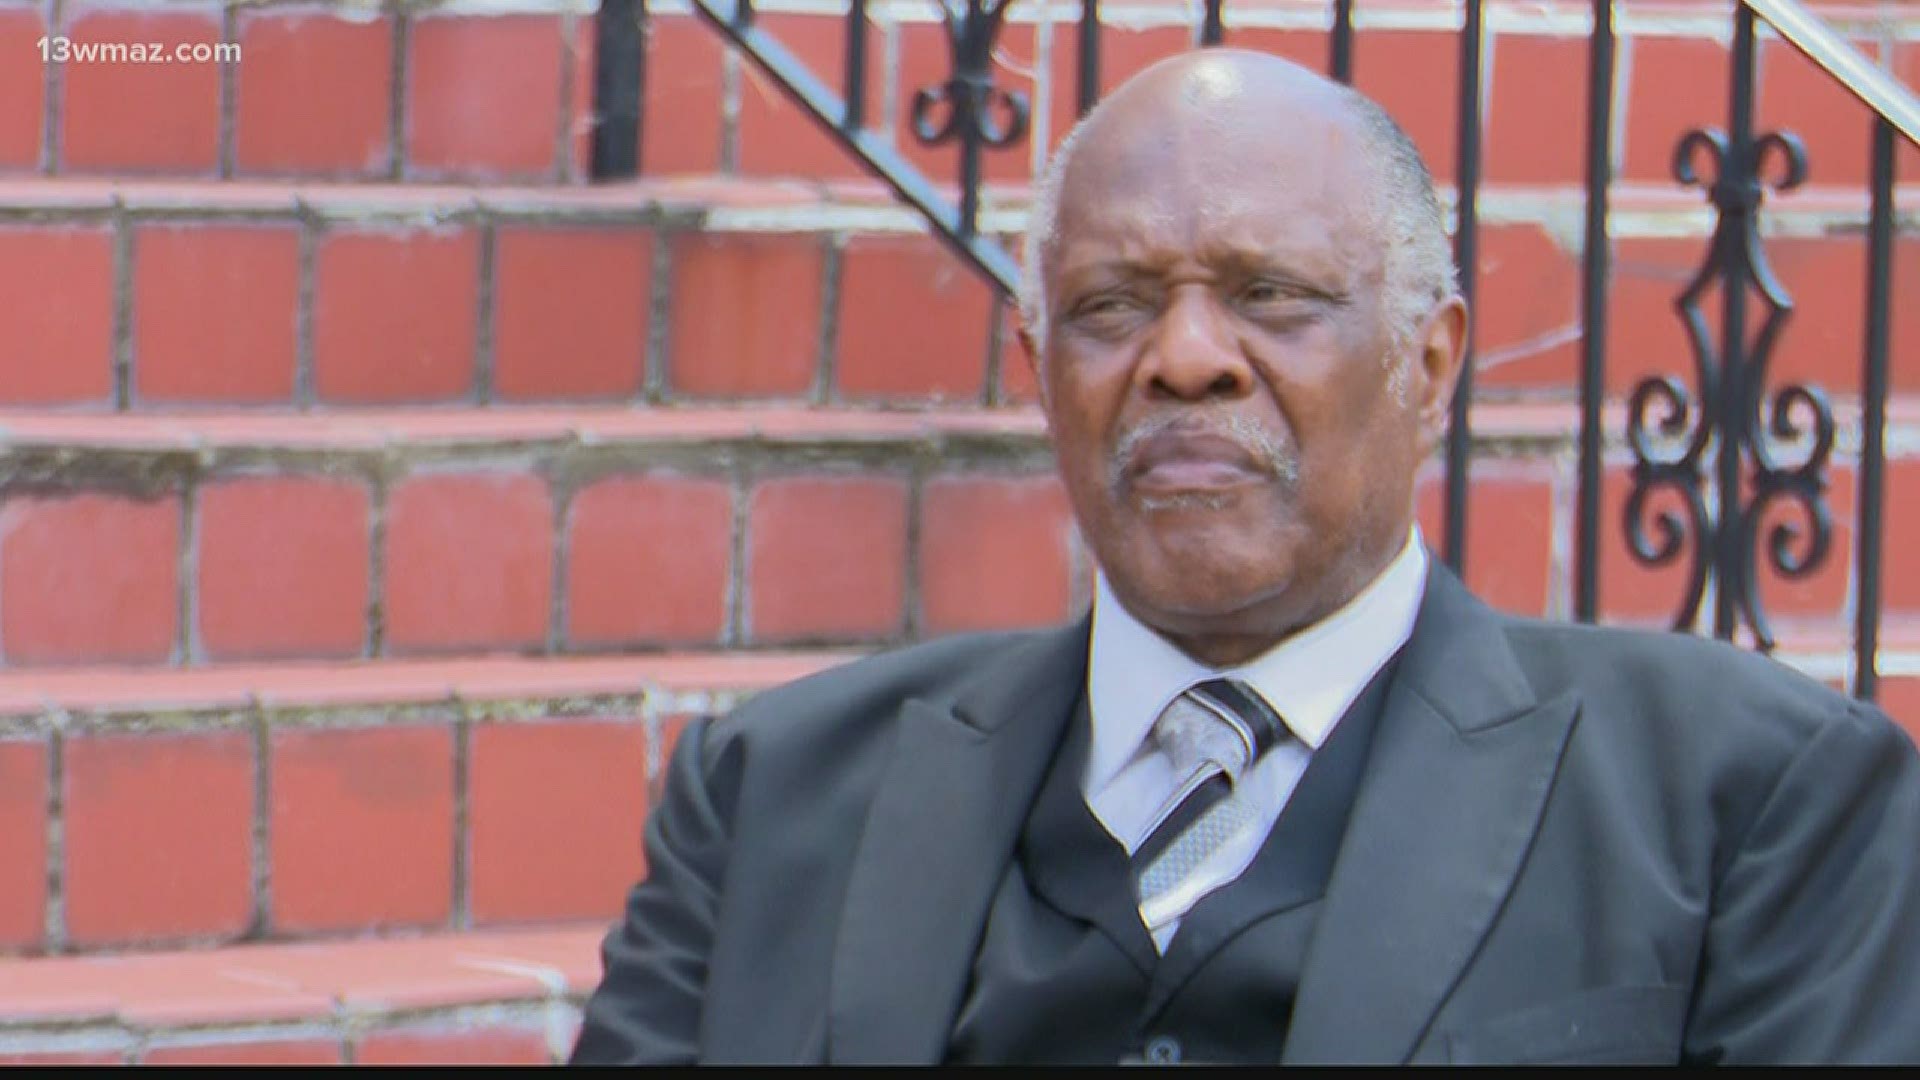 Reverend Walter Glover Junior has been the pastor at Greater Zion Hill Missionary Baptist Church since 1975. He spoke with our Zach Merchant about the protests.